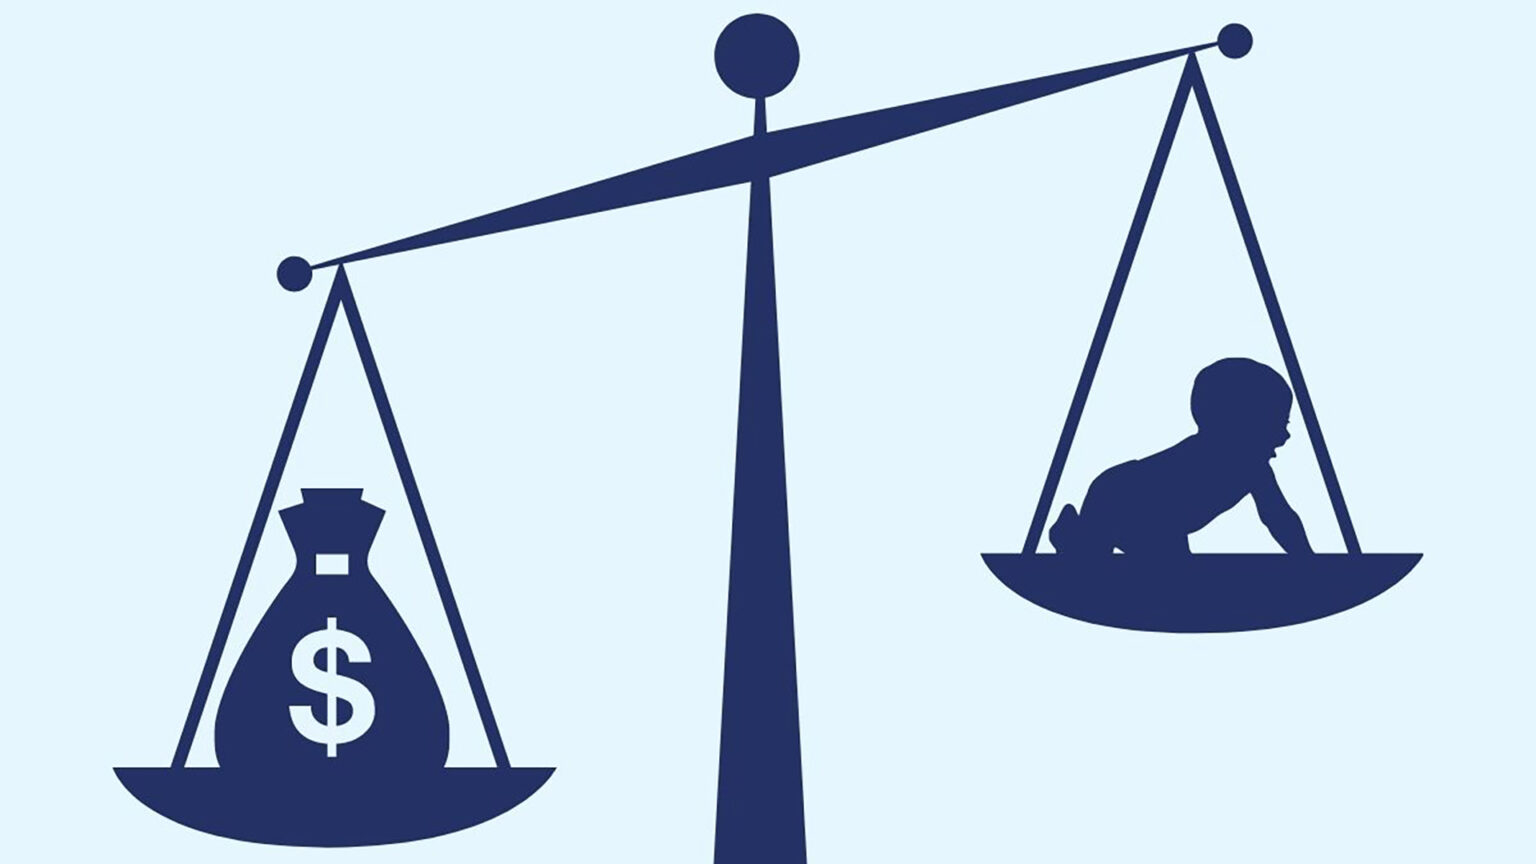 An illustration shows a stylized balance scale with a bag labeled with a $ dollar sign in one basket outweighing a crawling infant in the other basket.